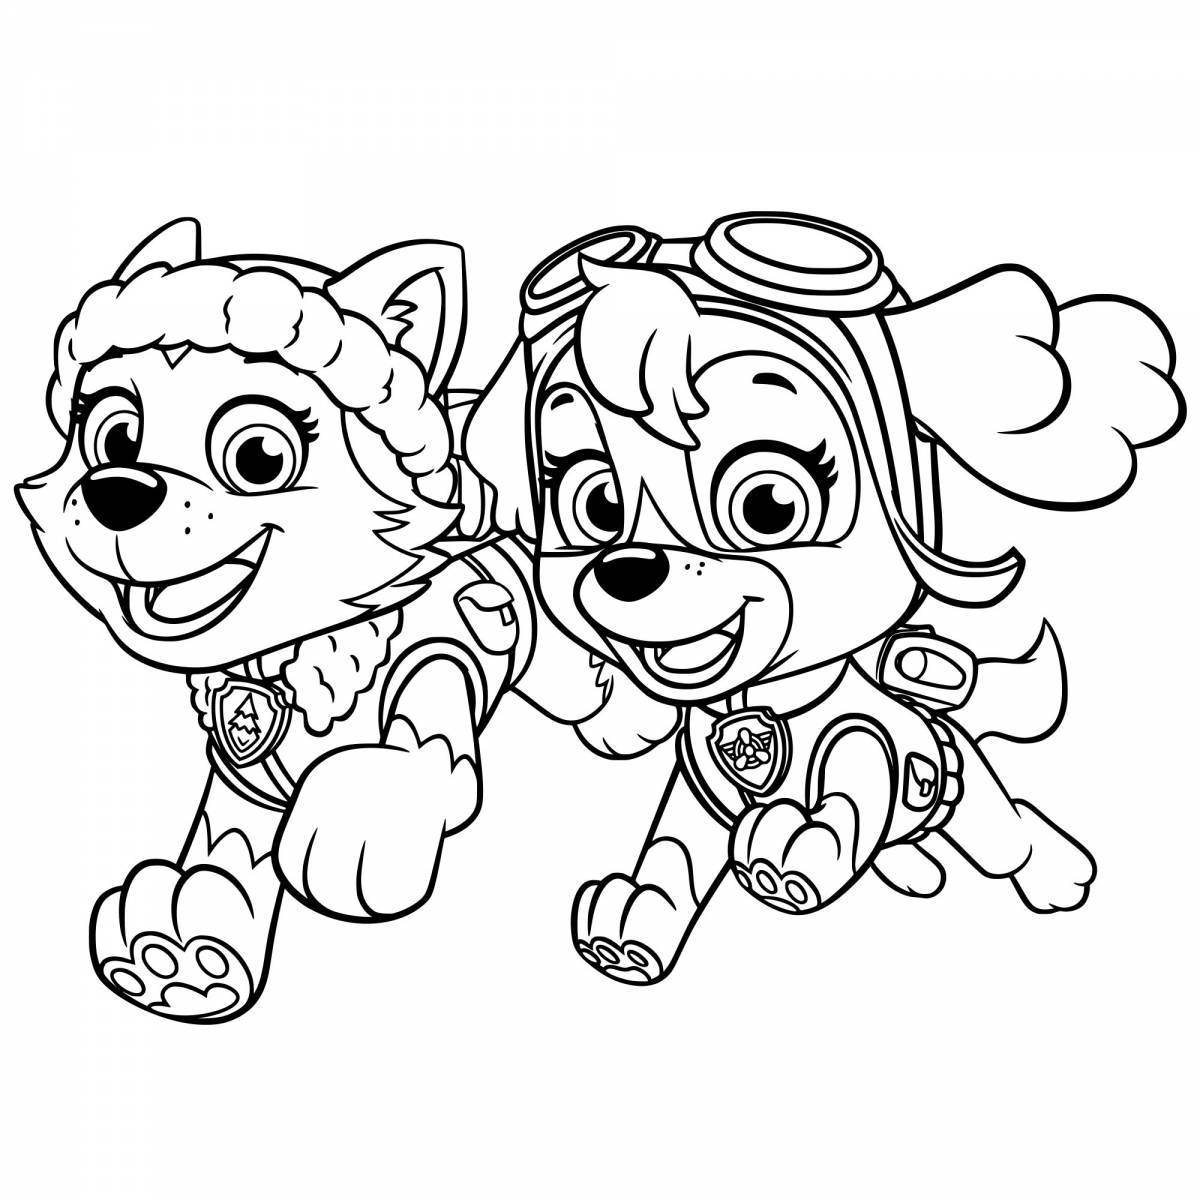 Adorable Everest Paw Patrol coloring page